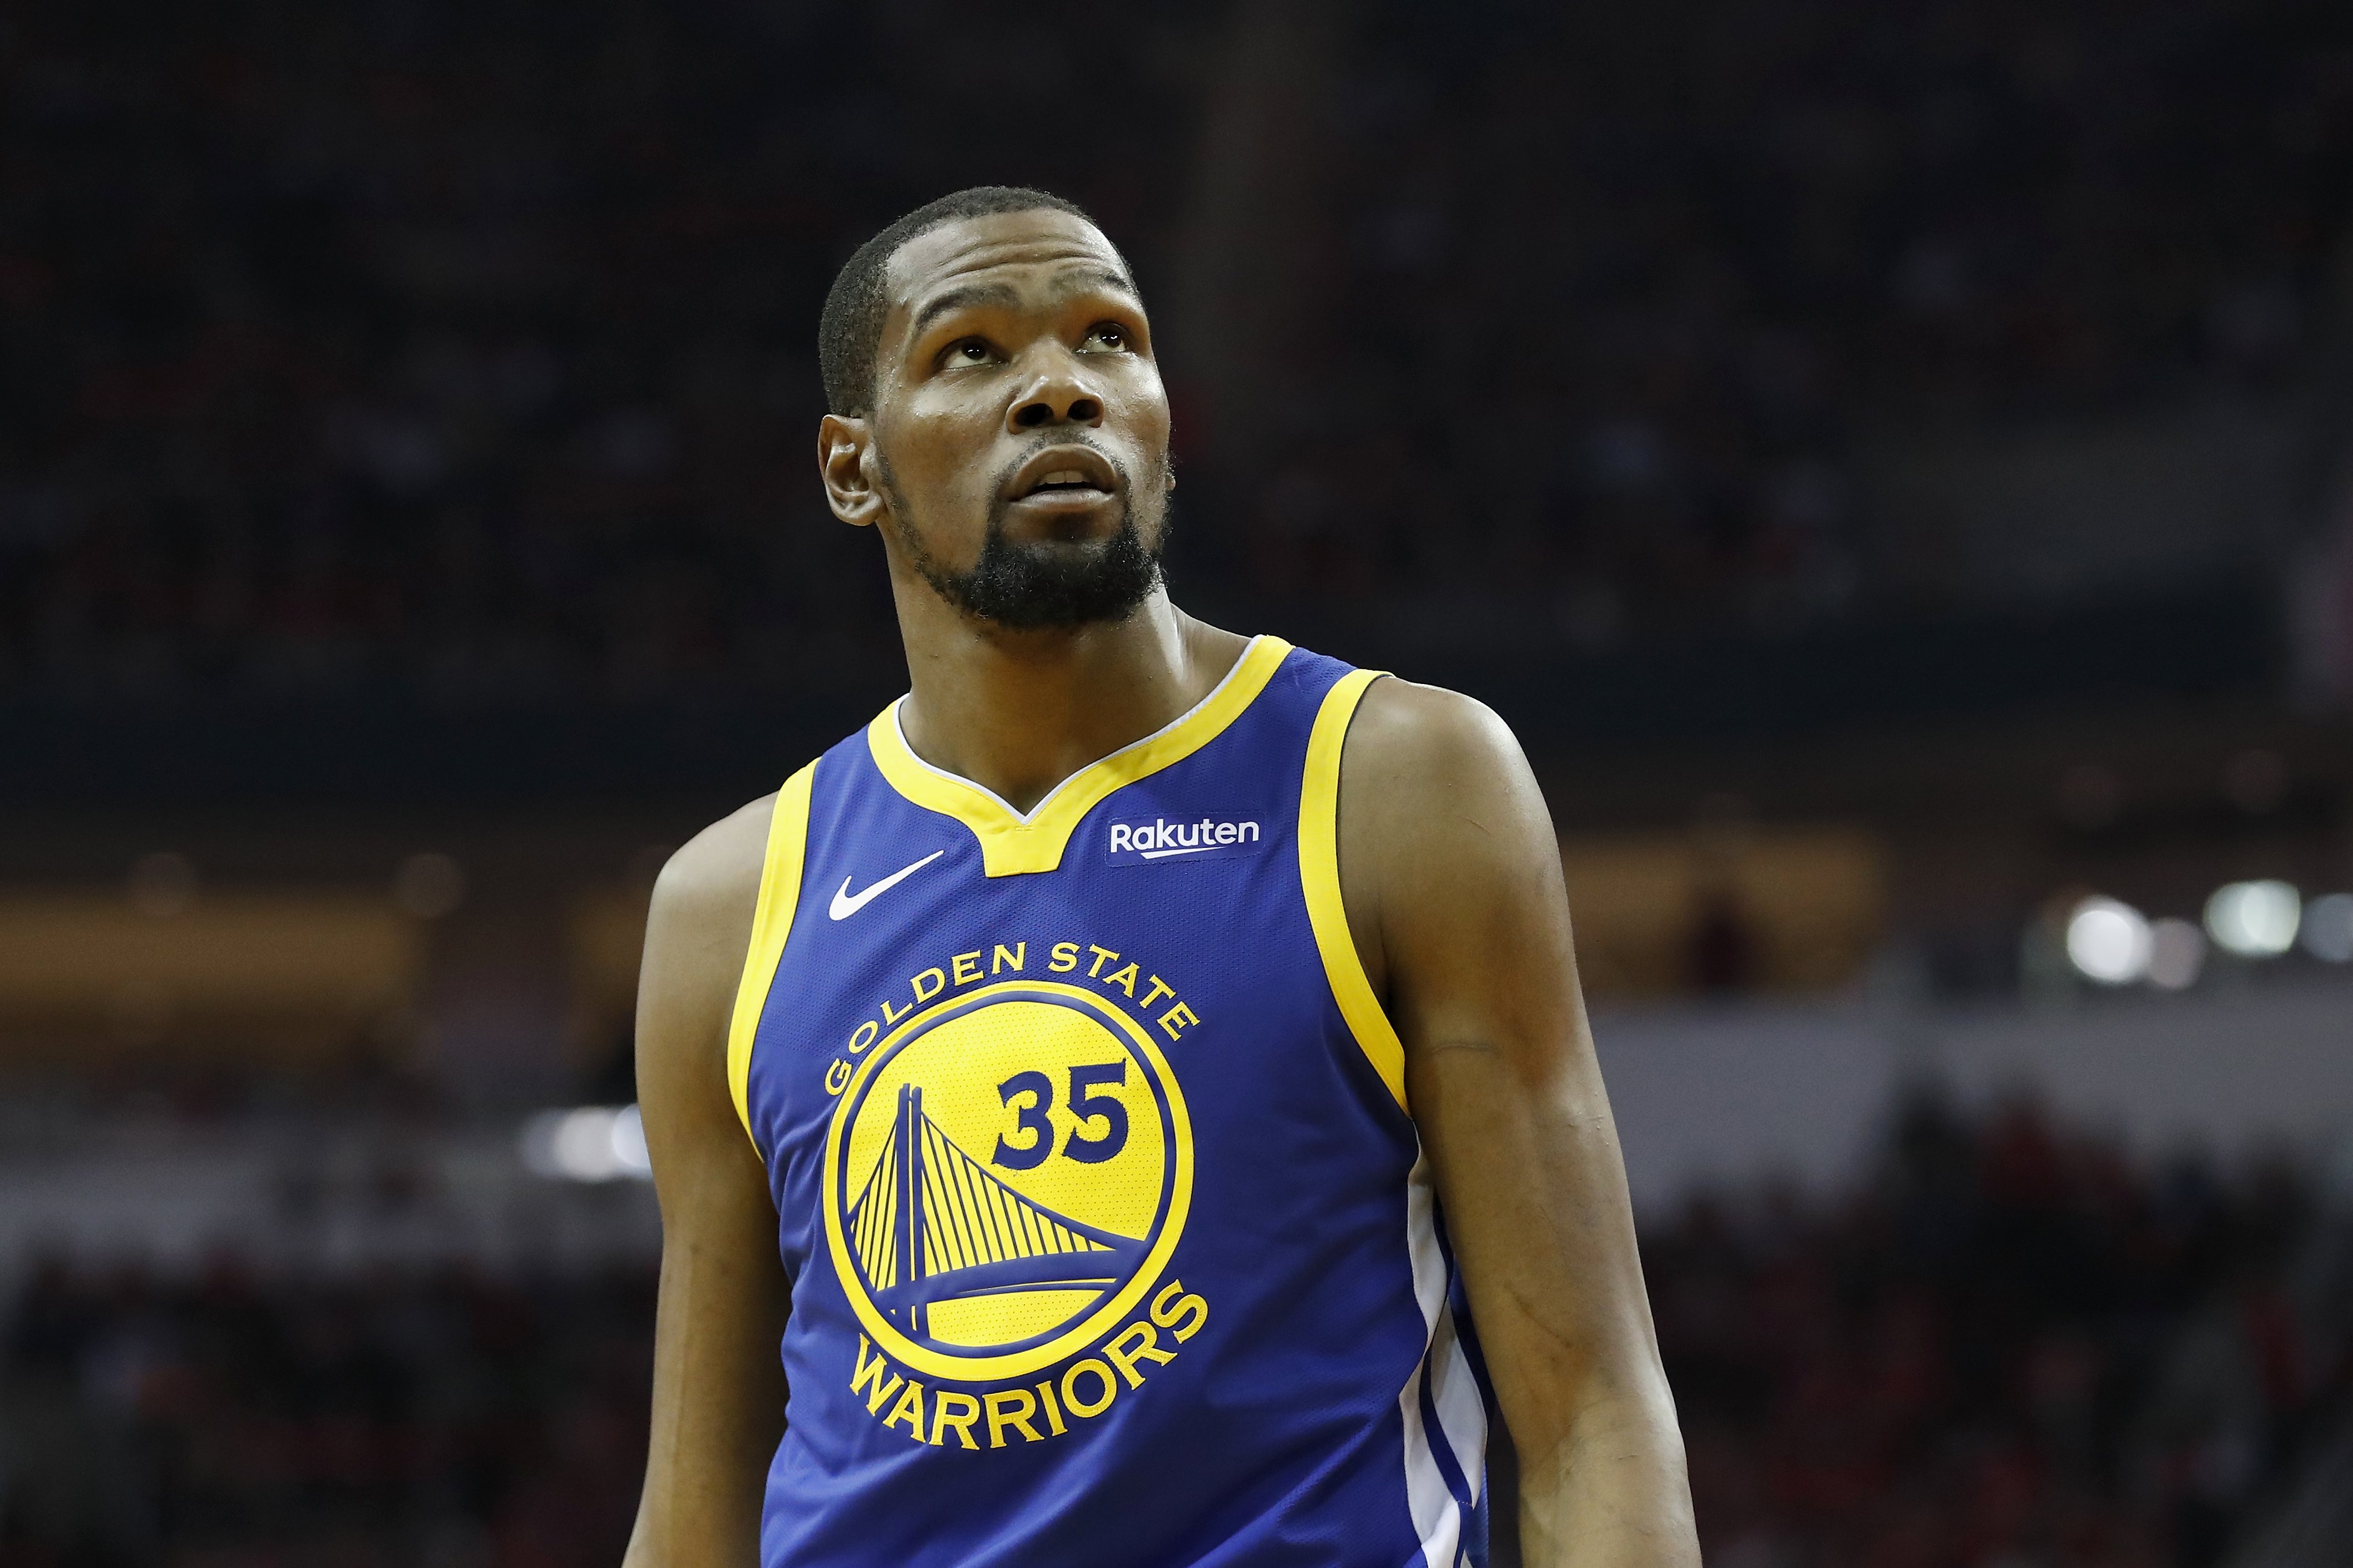 evin Durant during the 2019 NBA Western Conference Playoffs against the Houston Rockets at Toyota Center on May 4, 2019 in Houston, Texas | Photo: GettyImages